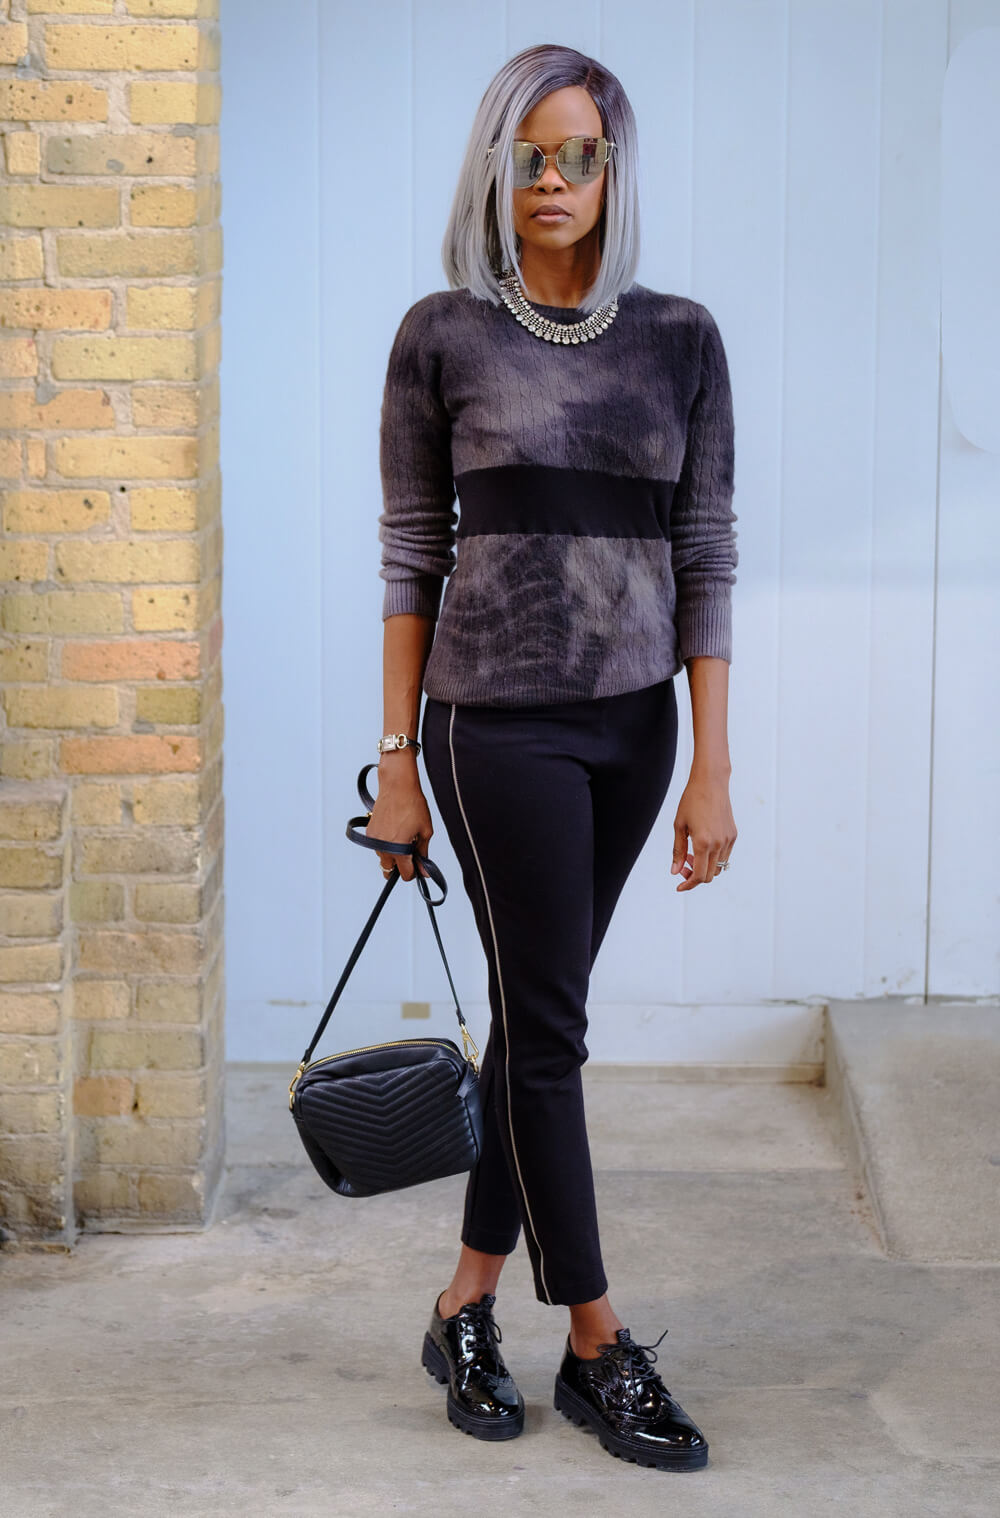 Cashmere sweater, Canadian fashion Blogger, Winnipeg Fashion Blogger, Tie Dye trend, How to style an all black outfit, Tie-Dye